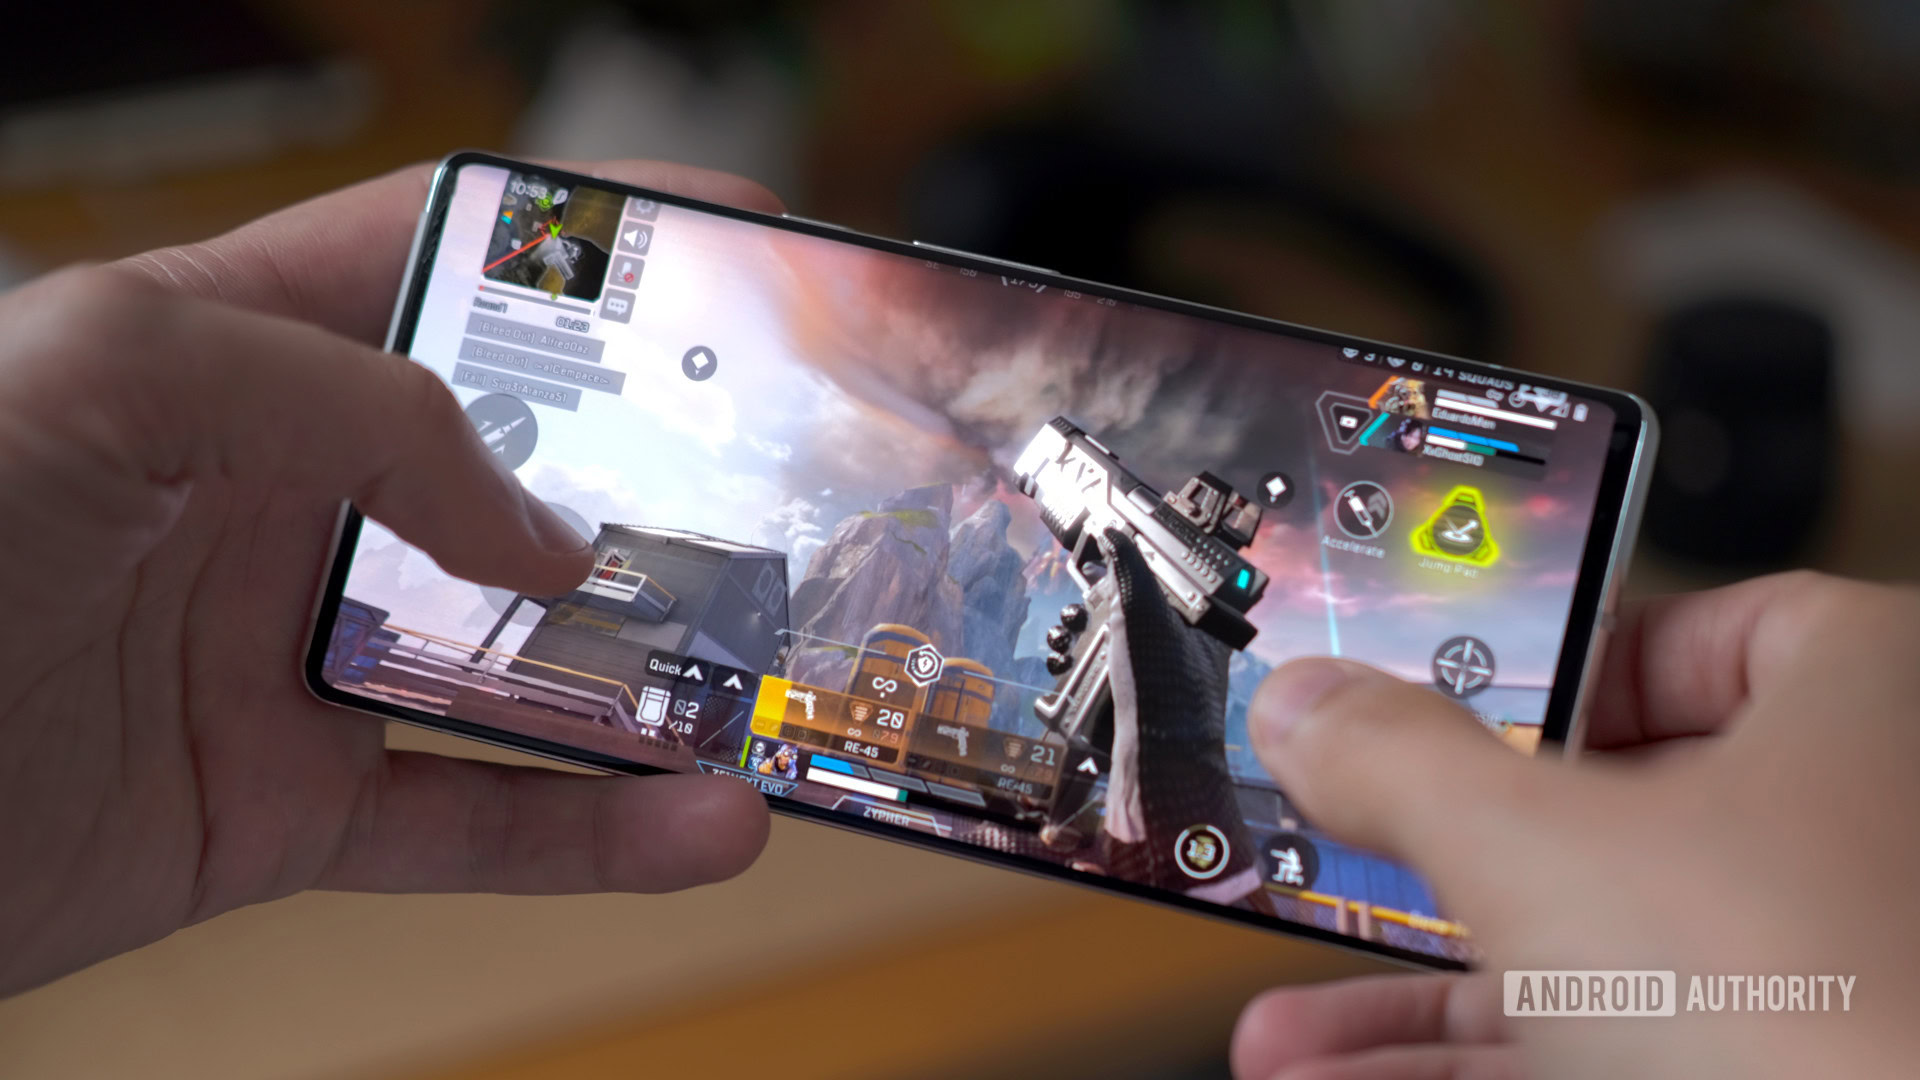 Mobile gaming in hand